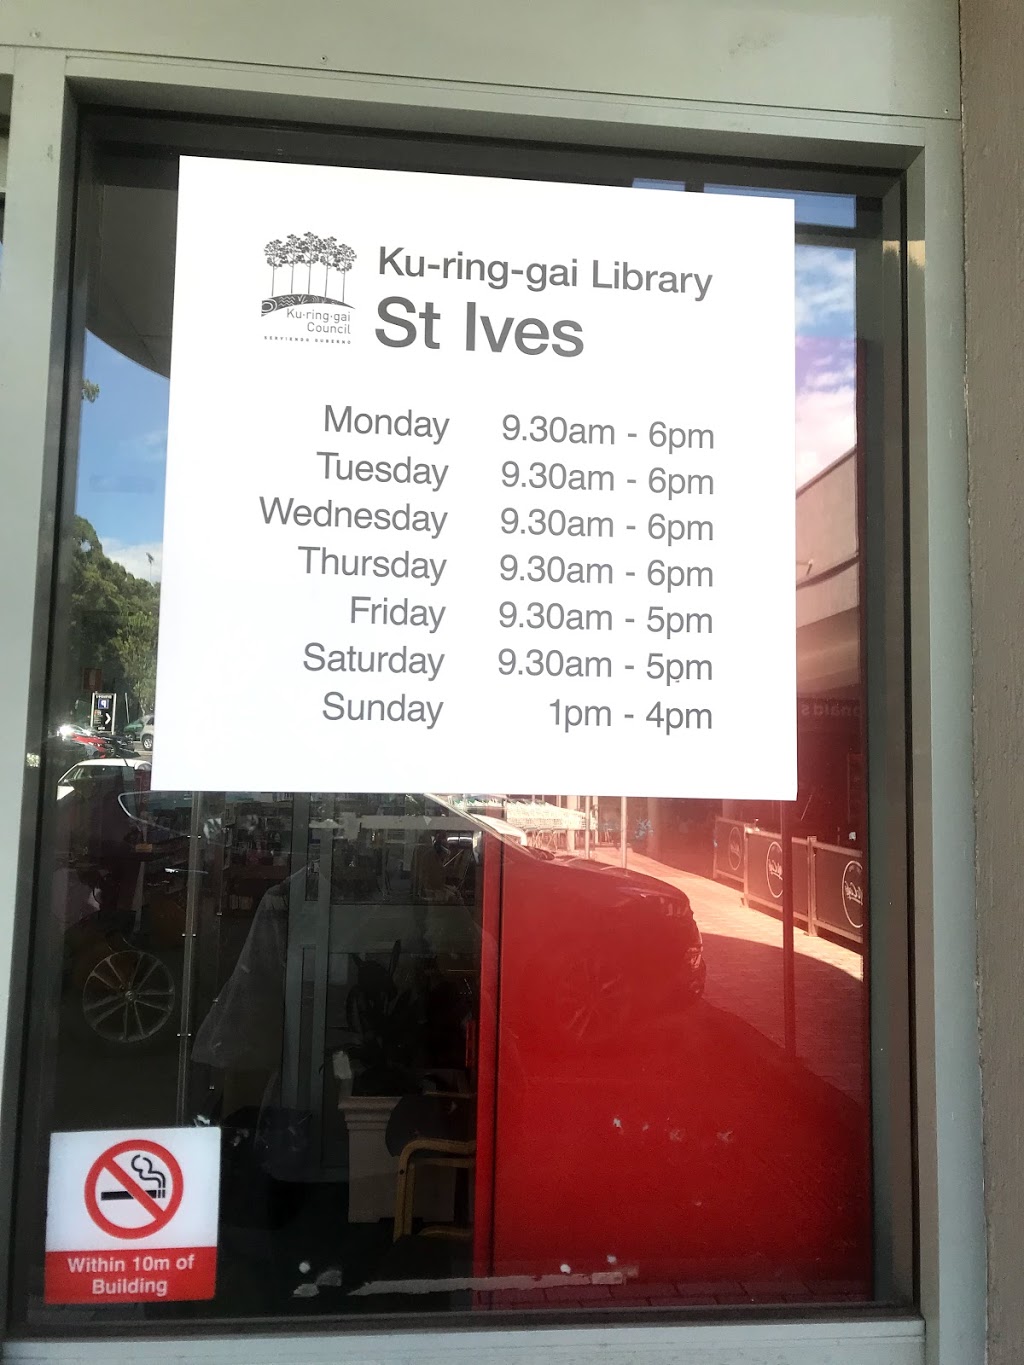 St Ives Library | library | 166 Mona Vale Rd, St. Ives NSW 2075, Australia | 0294240453 OR +61 2 9424 0453